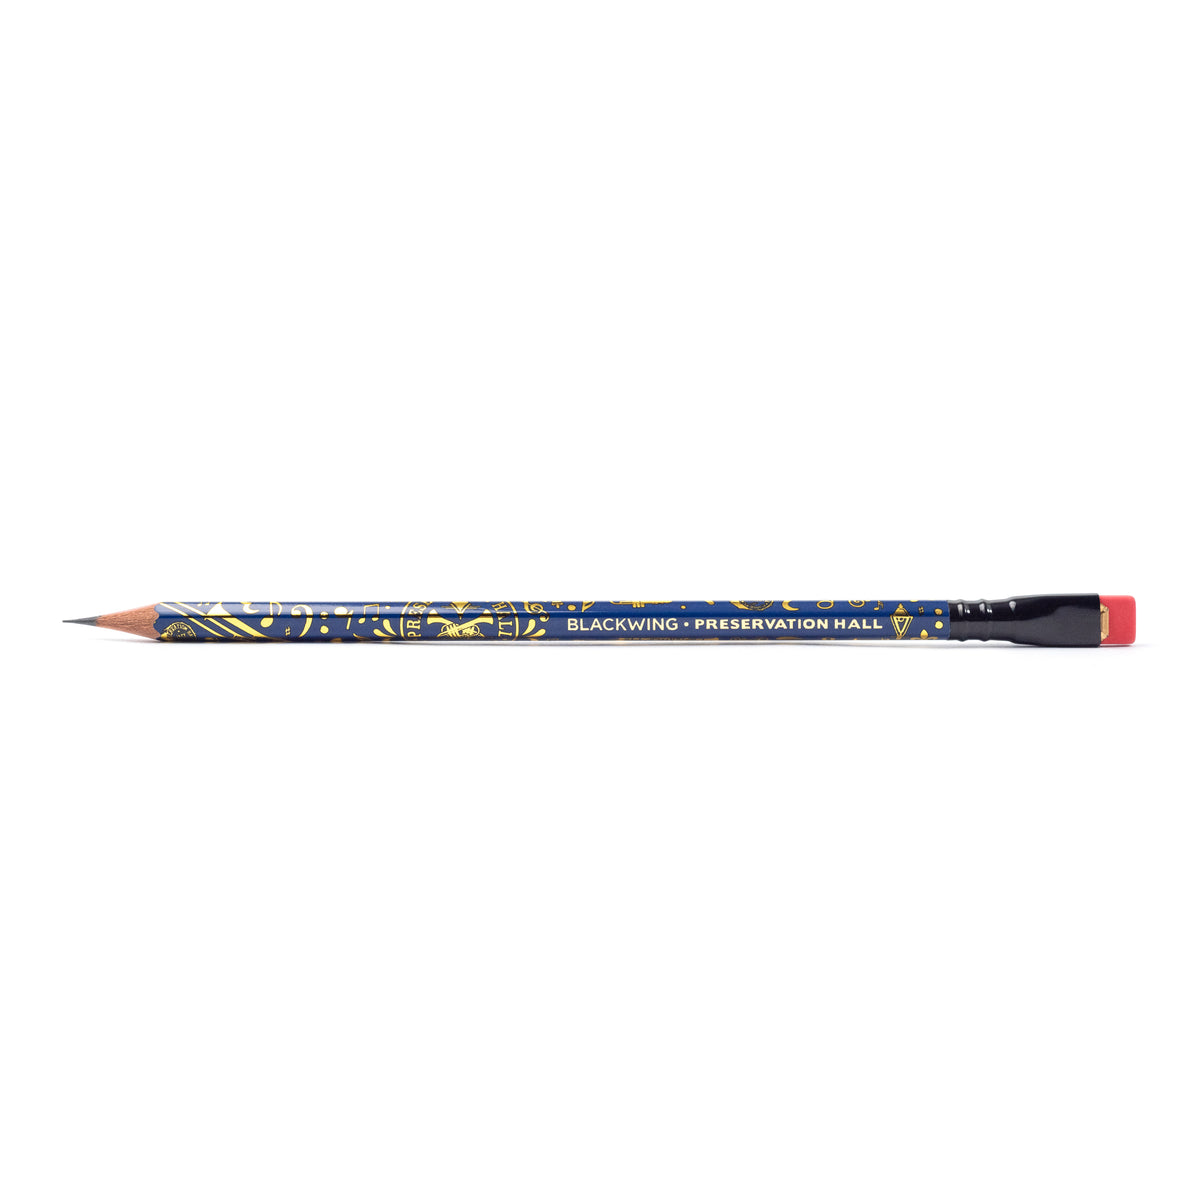 A Blackwing X Preservation Hall (Set of 12) with a gold tip on a white background at Preservation Hall.